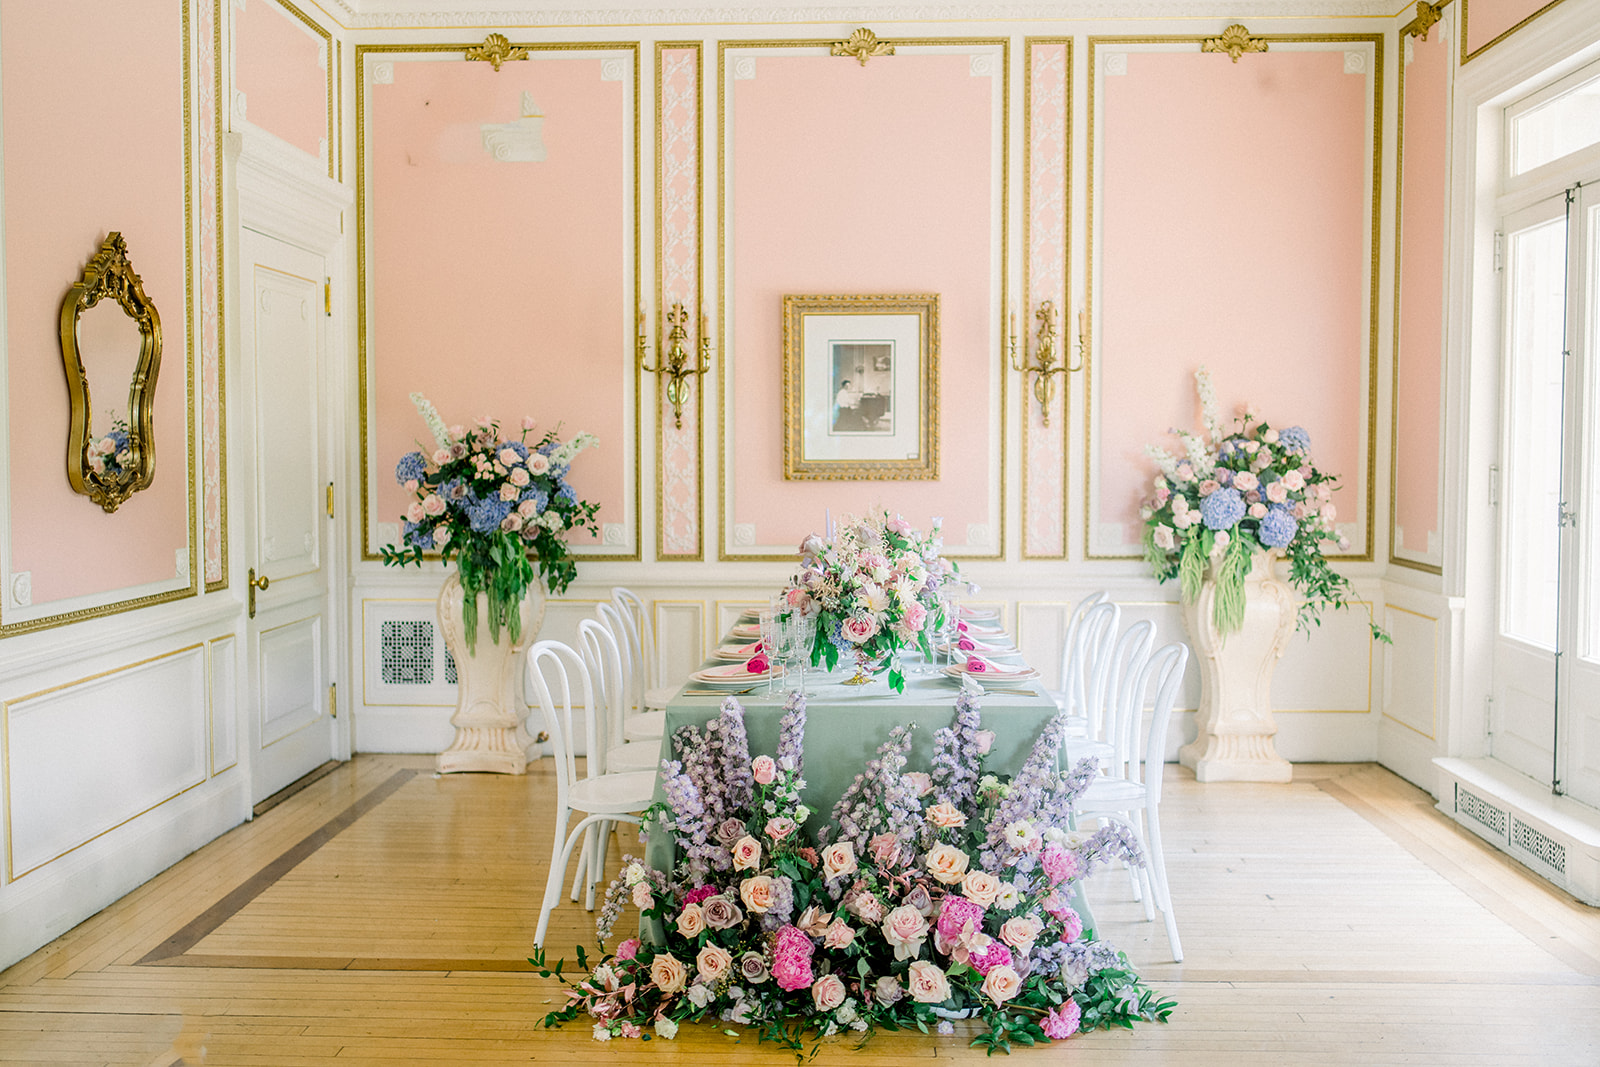 Exquisite wedding reception setup at Cairnwood Estate with a lavish floral centerpiece, elegant white chairs, and ornate gold mirrors accenting the pastel pink walls.